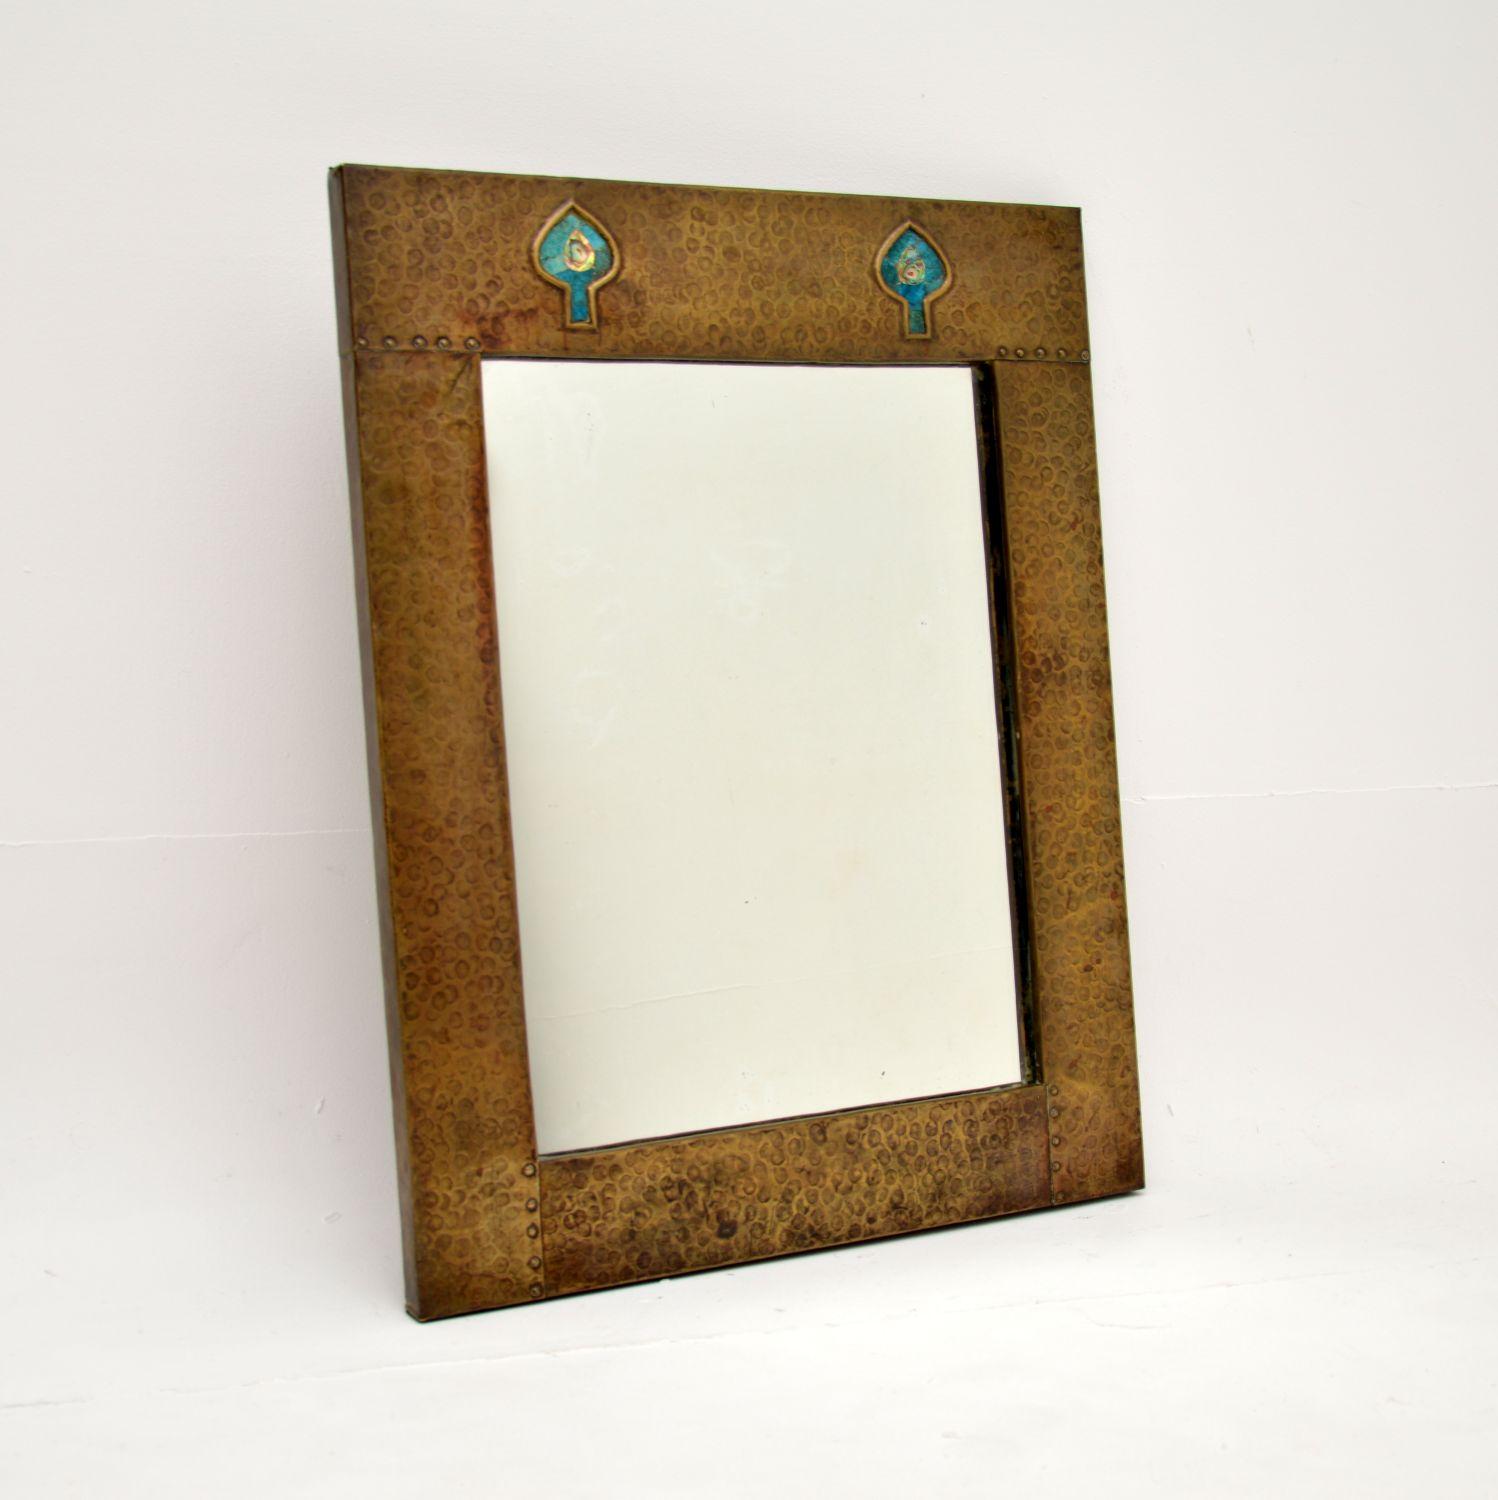 A stunning antique Art Nouveau beaten brass mirror. This was likely made for Liberty of London, it dates from the 1890-1900 period.

It is beautifully made and of lovely quality, the beaten brass frame has two inset spade shape designs at the top,